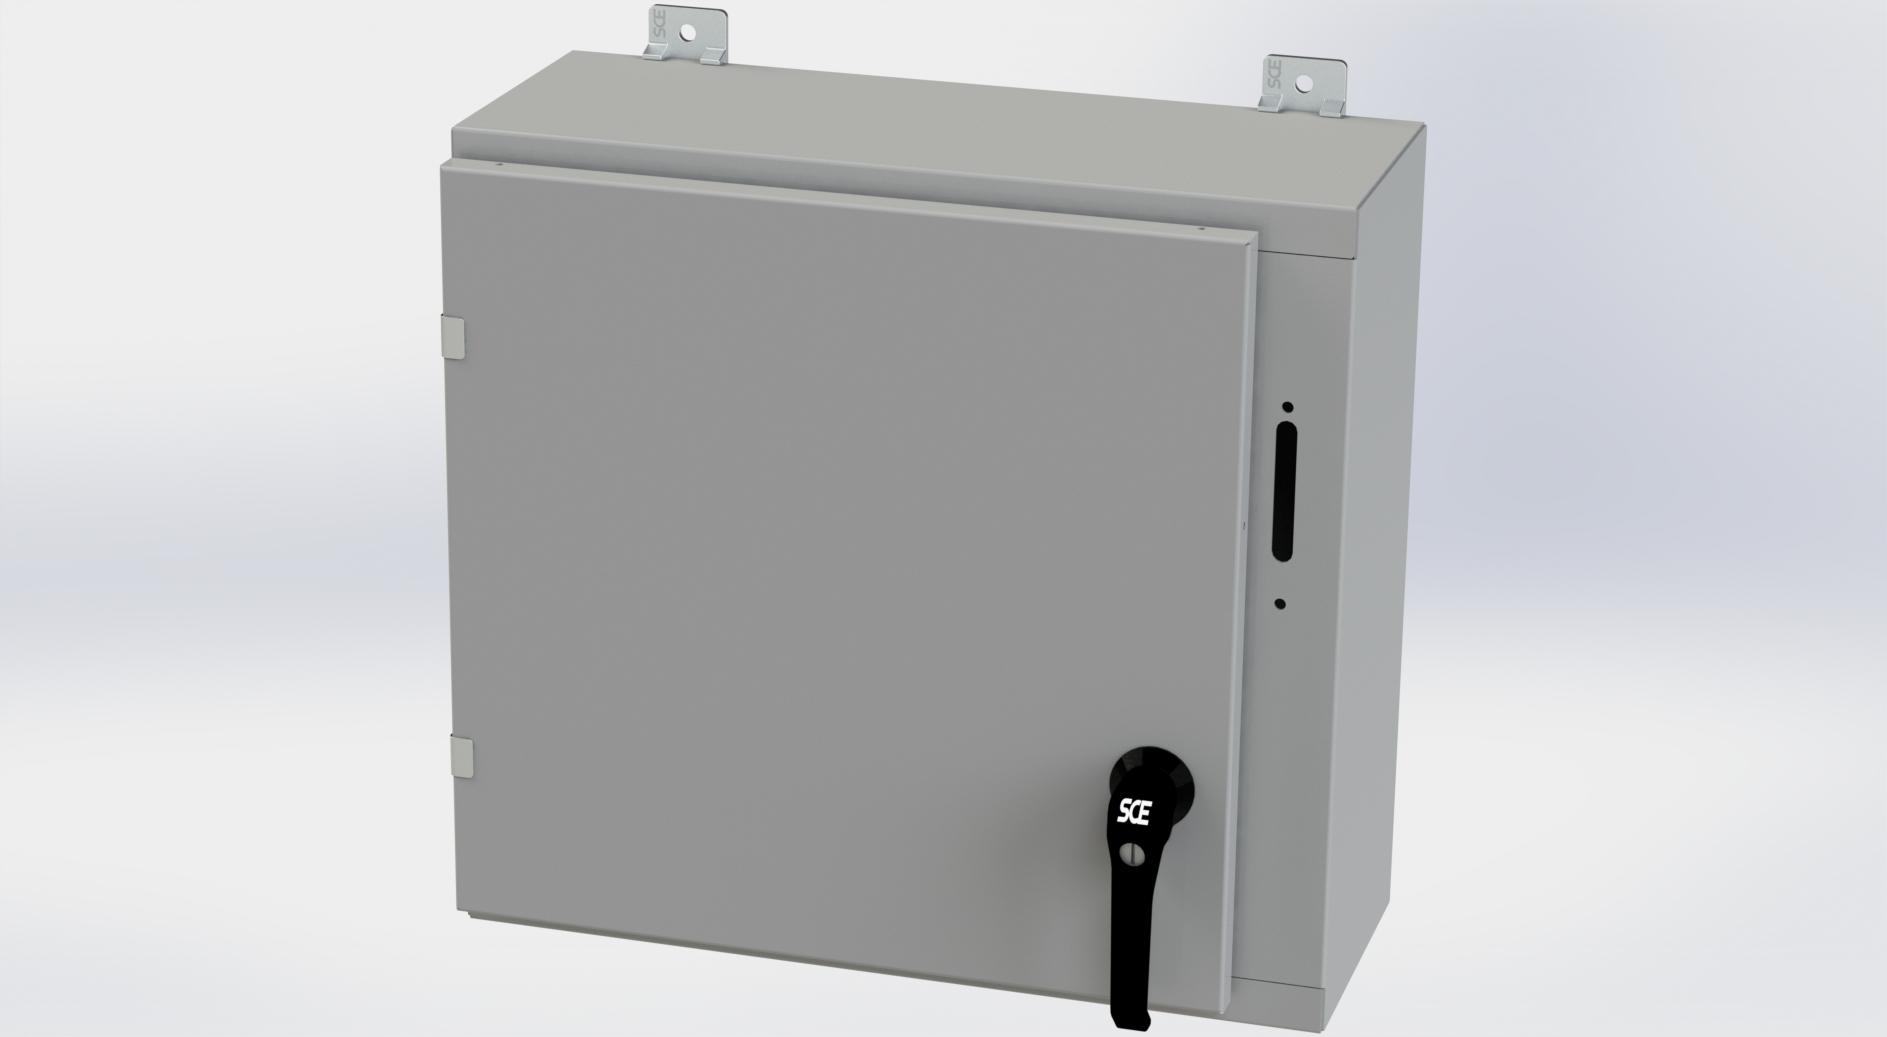 Saginaw Control SCE-20SA2208LPPL Obselete Use SCE-20XEL2108LP, Height:20.00", Width:21.38", Depth:8.00", ANSI-61 gray powder coating inside and out. Optional sub-panels are powder coated white.